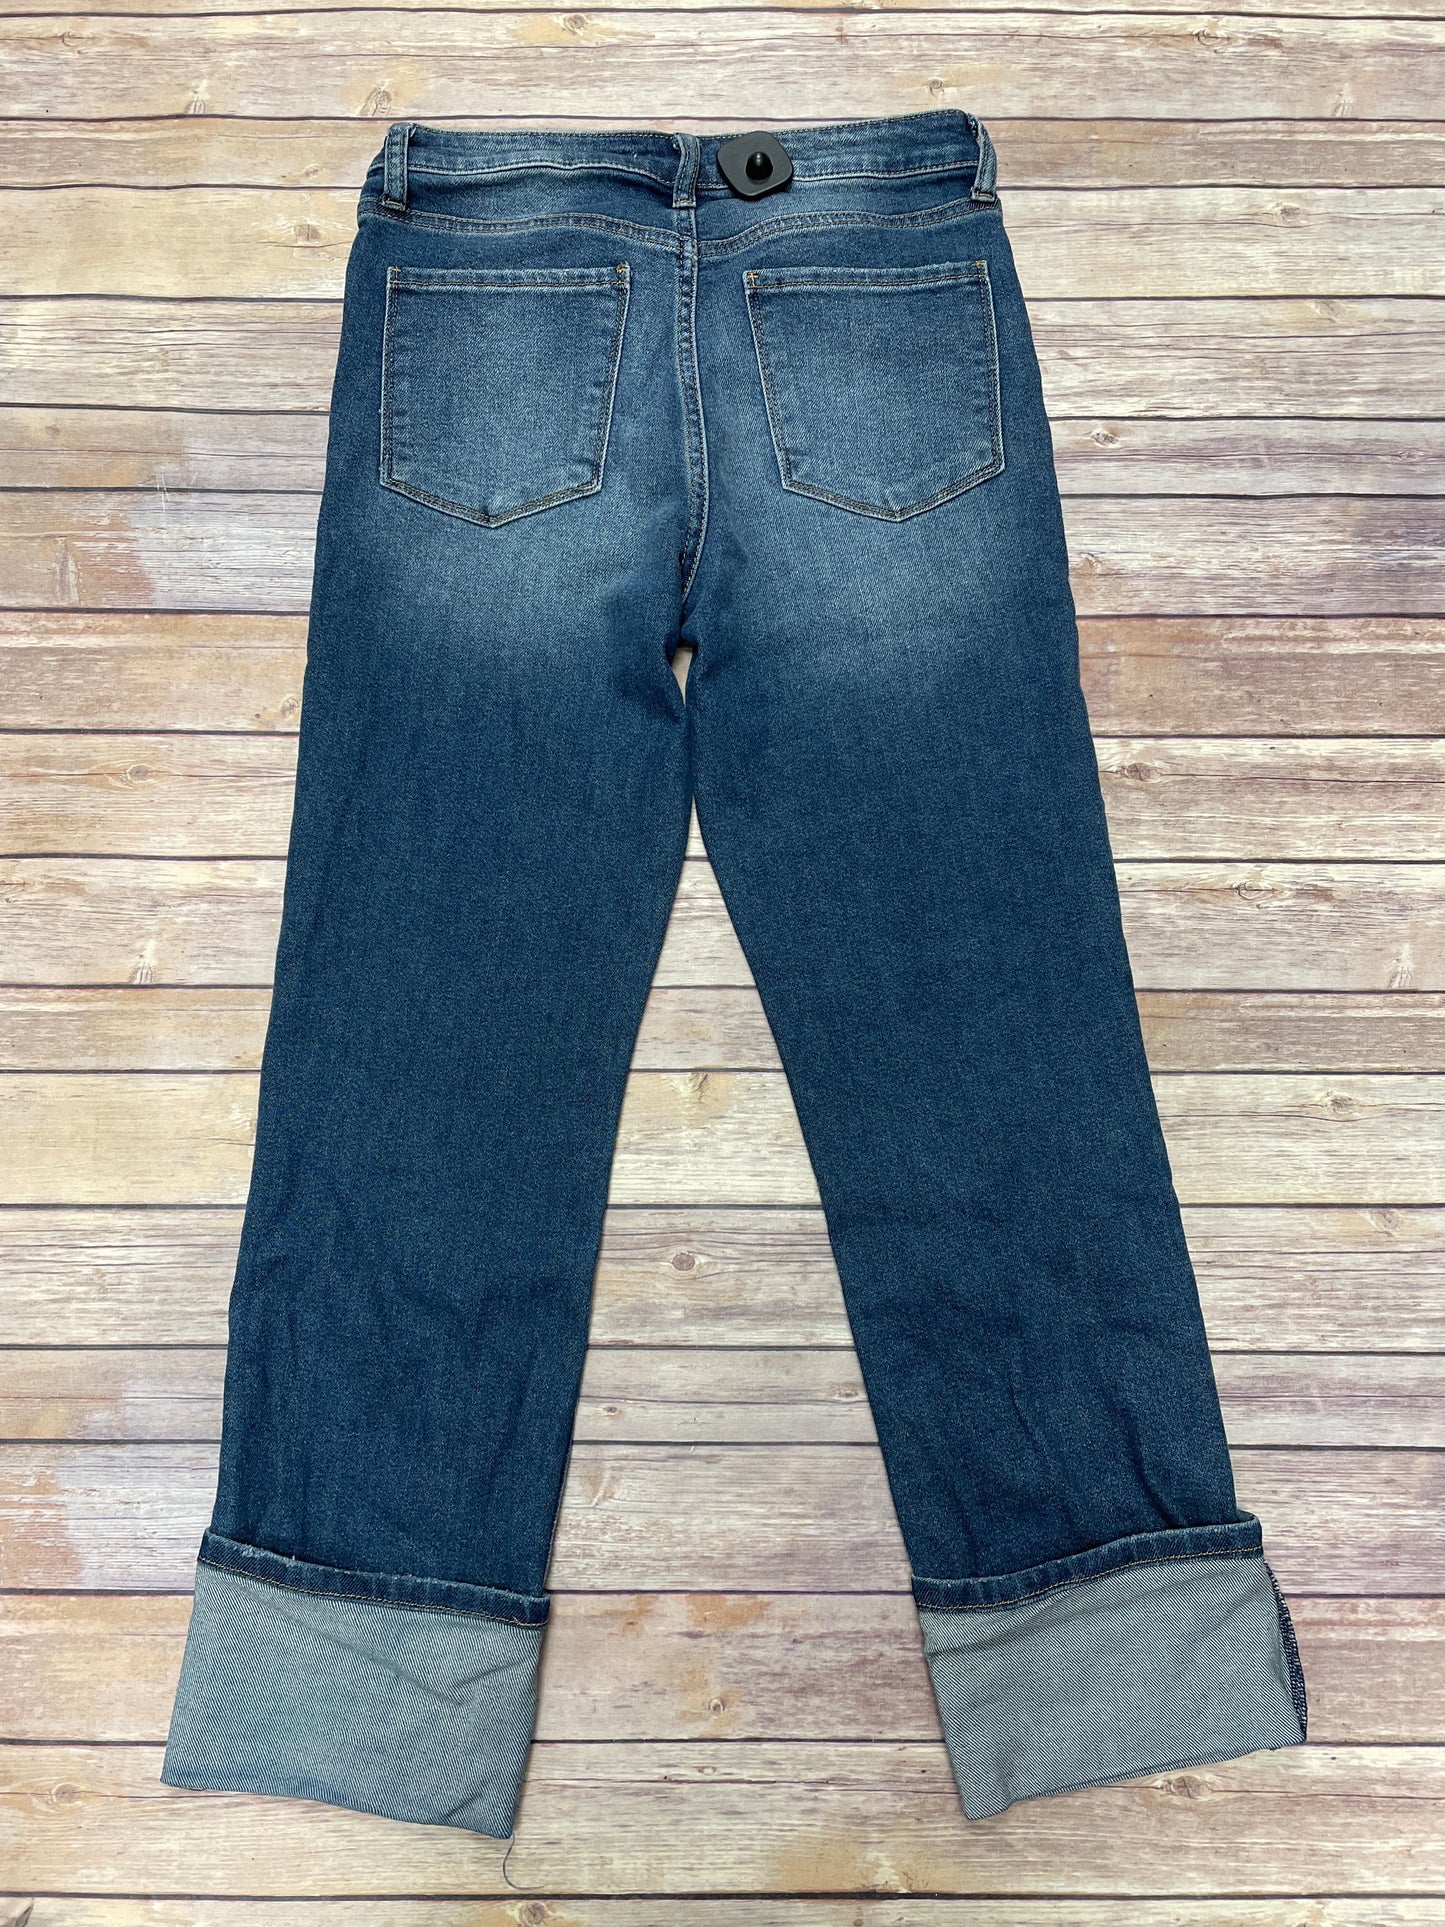 Jeans Straight By Cme  Size: 6